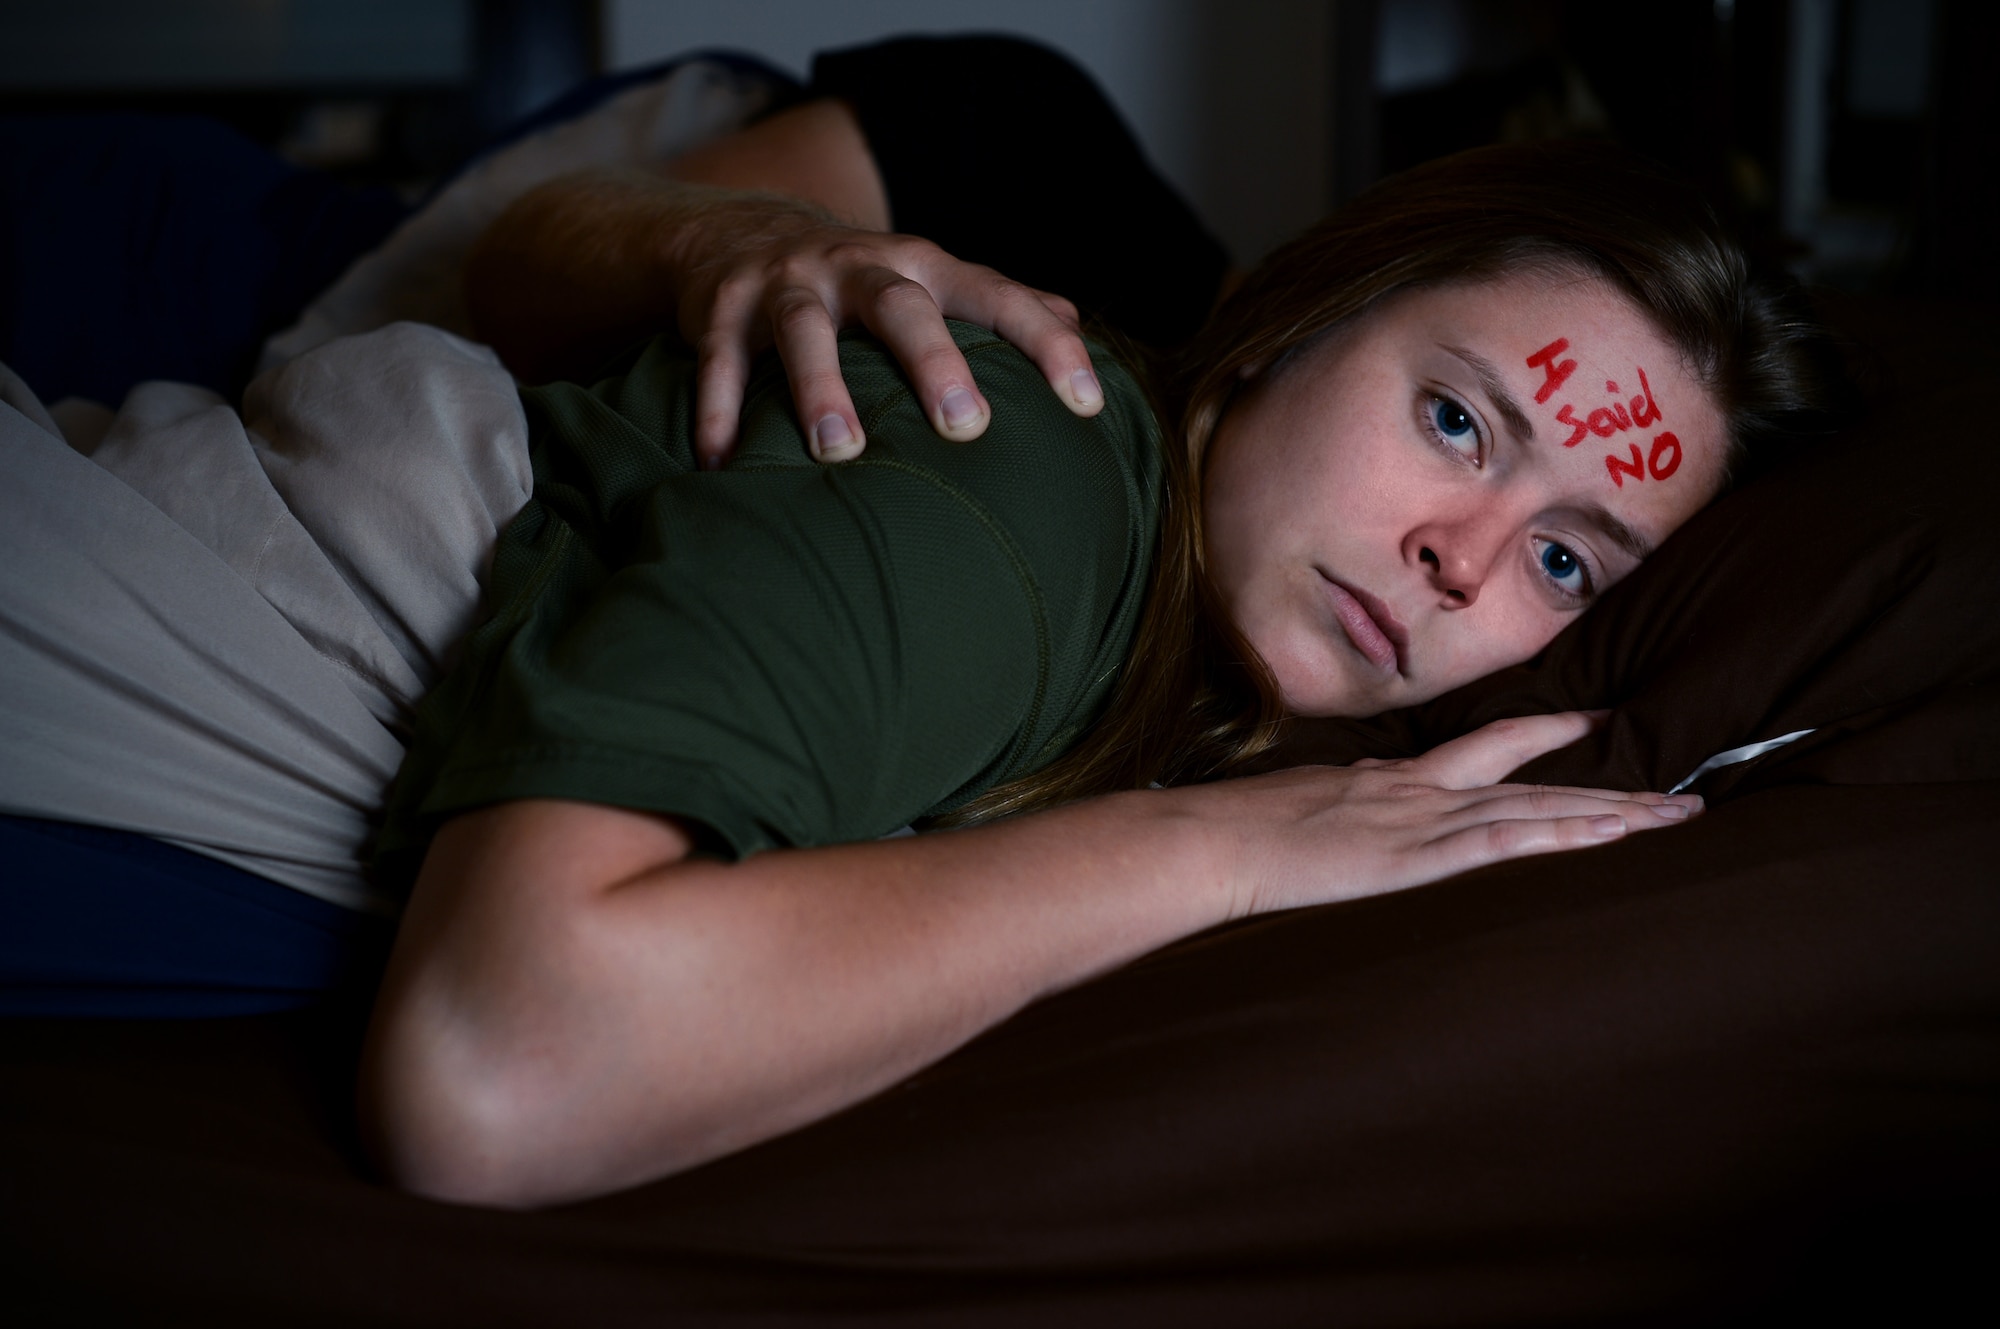 U.S. Air Force Airman 1st Class Kayleen Moss, a 52nd Medical Operations Squadron pediatrics technician, and her husband, Brandon, pose for an anti-sexual assault campaign image at Spangdahlem Air Base, Germany, Aug. 13, 2014. The Air Force Sexual Assault Prevention and Response program provides services to assist victims and survivors of sexual violence. SAPR has an ongoing campaign to encourage people to step up and step in to prevent sexual assault. Victims can reach a trained victim advocate 24/7 on the Whiteman Air Force Base SAPR confidential hotline at 660-687-7272.  (U.S. Air Force photo by Airman 1st Class Kyle Gese/Released)